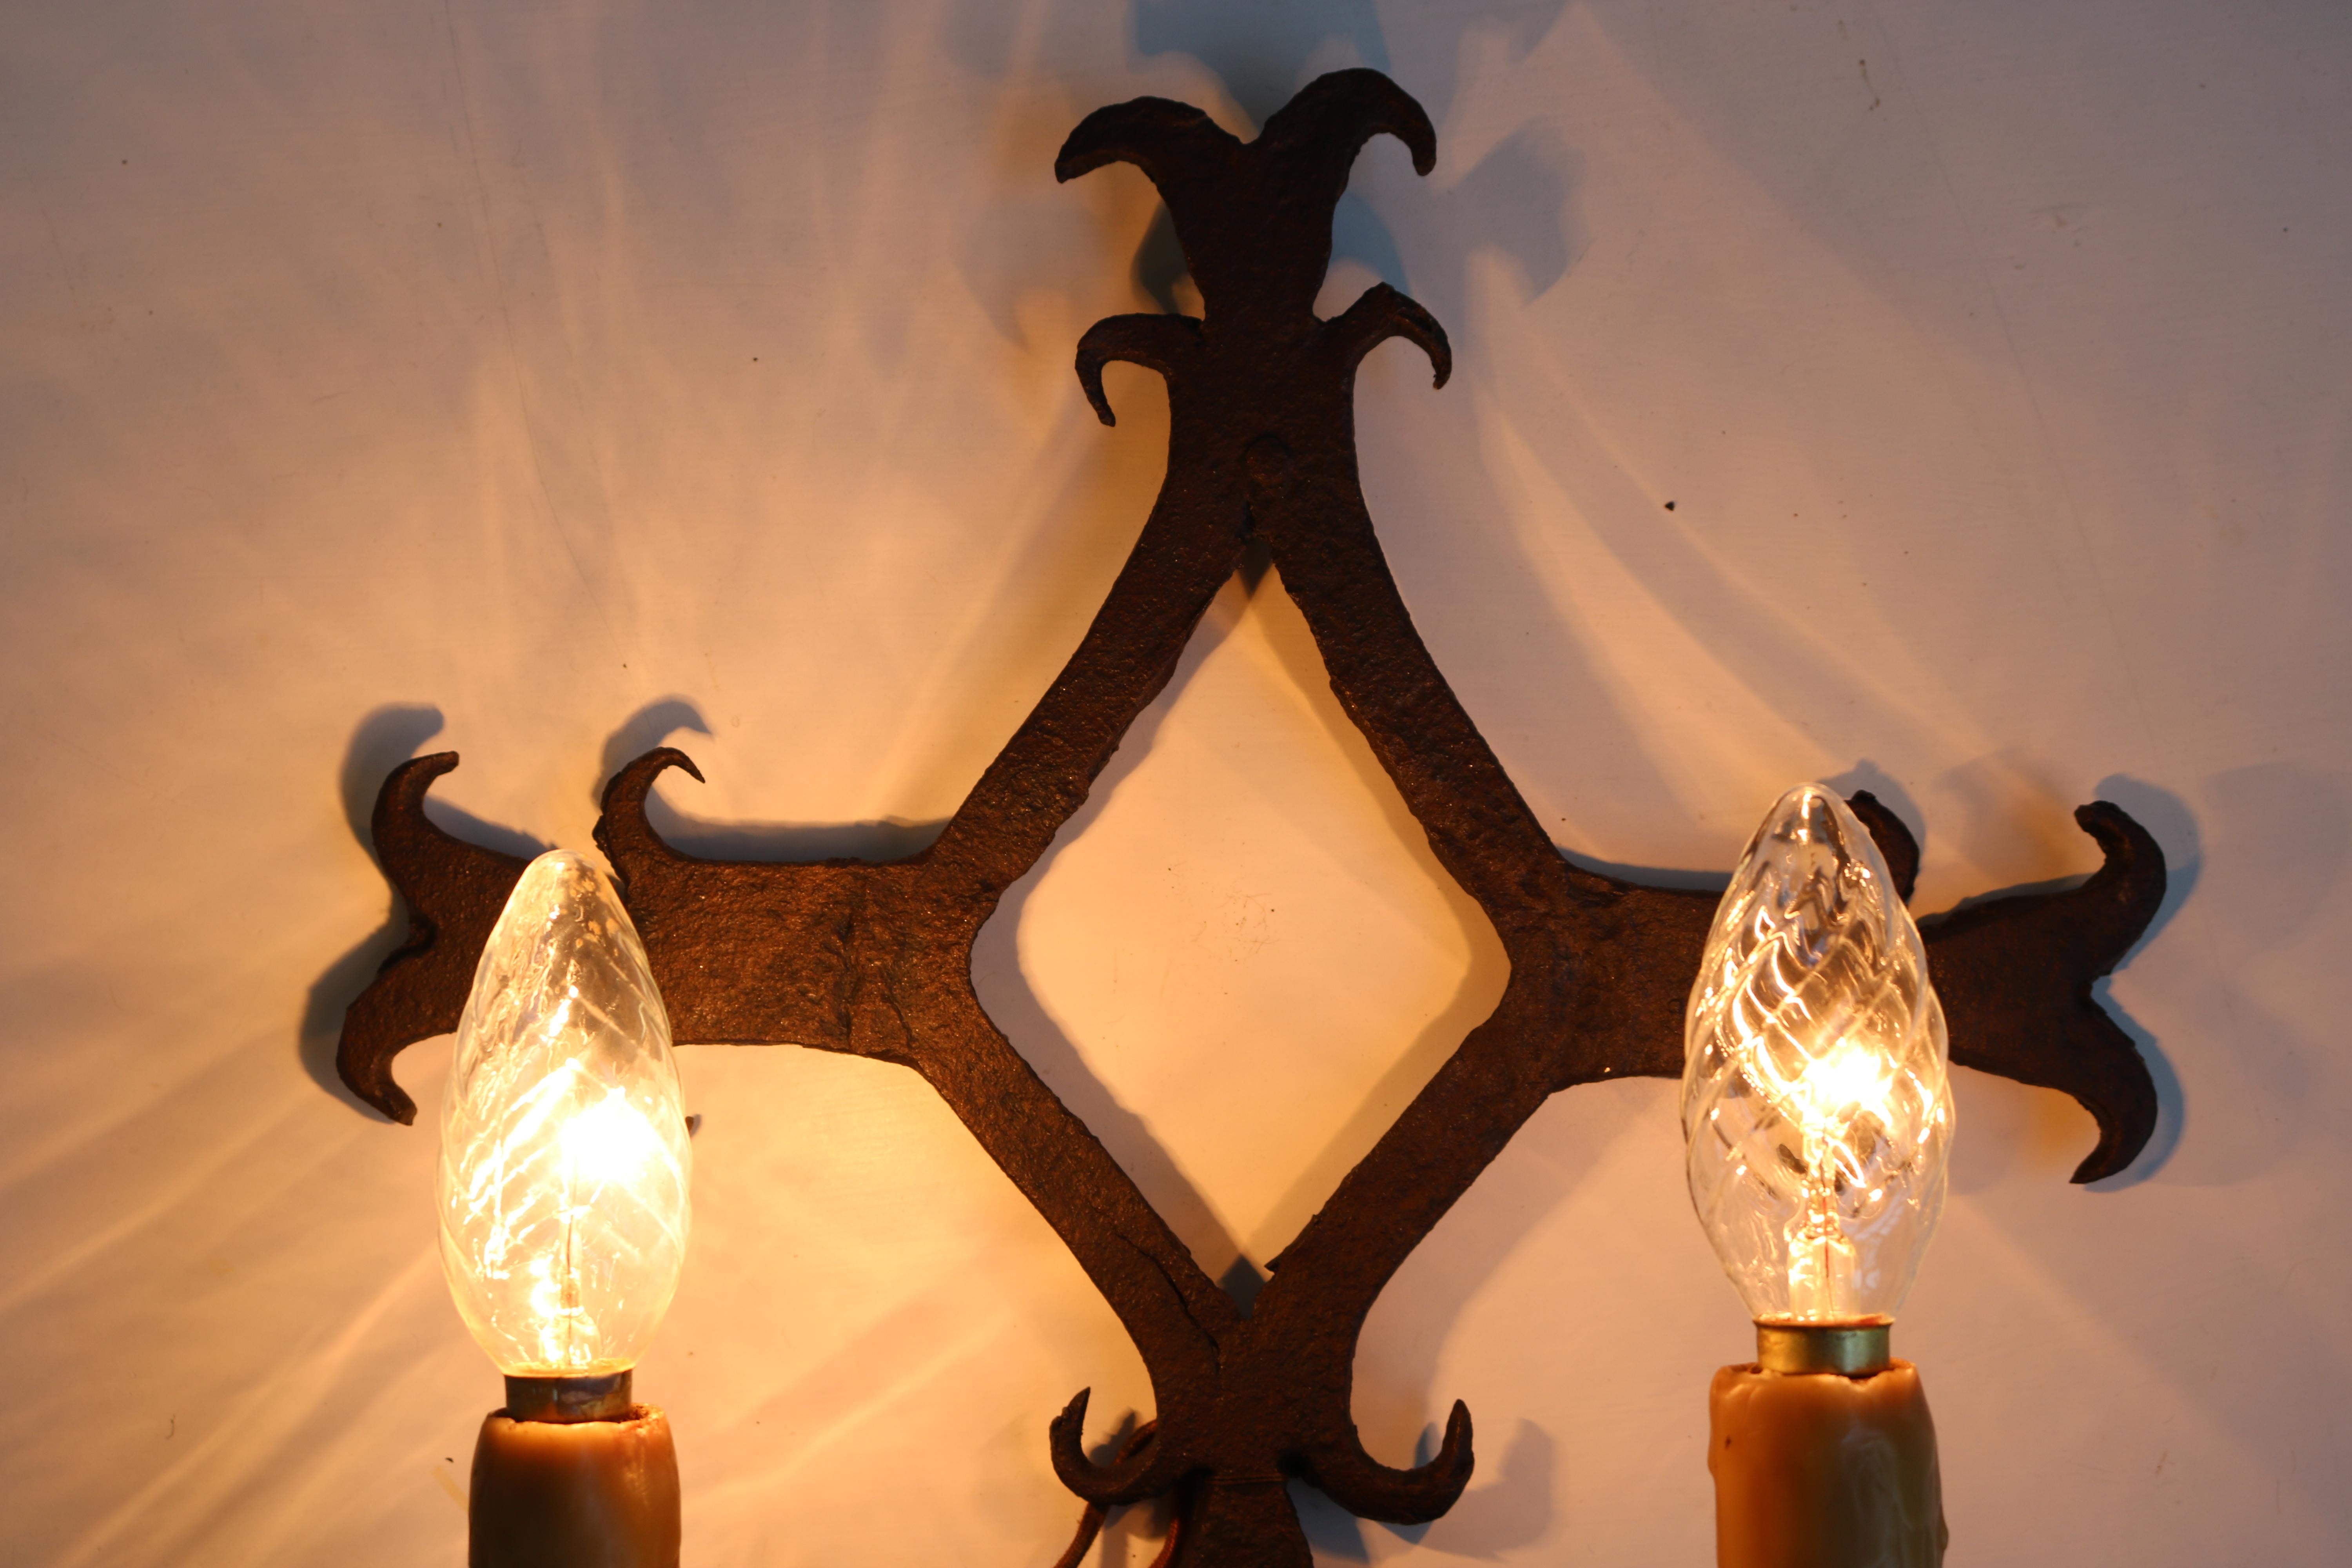 Lovely pair of hand-crafted wrought iron wall lights from France 1900. Spanish style or Arts & Crafts. 
They are heavy and fully hand made, really gorgeous details. 
Fully original with gorgeous candle wax covered light sockets. 

They are in